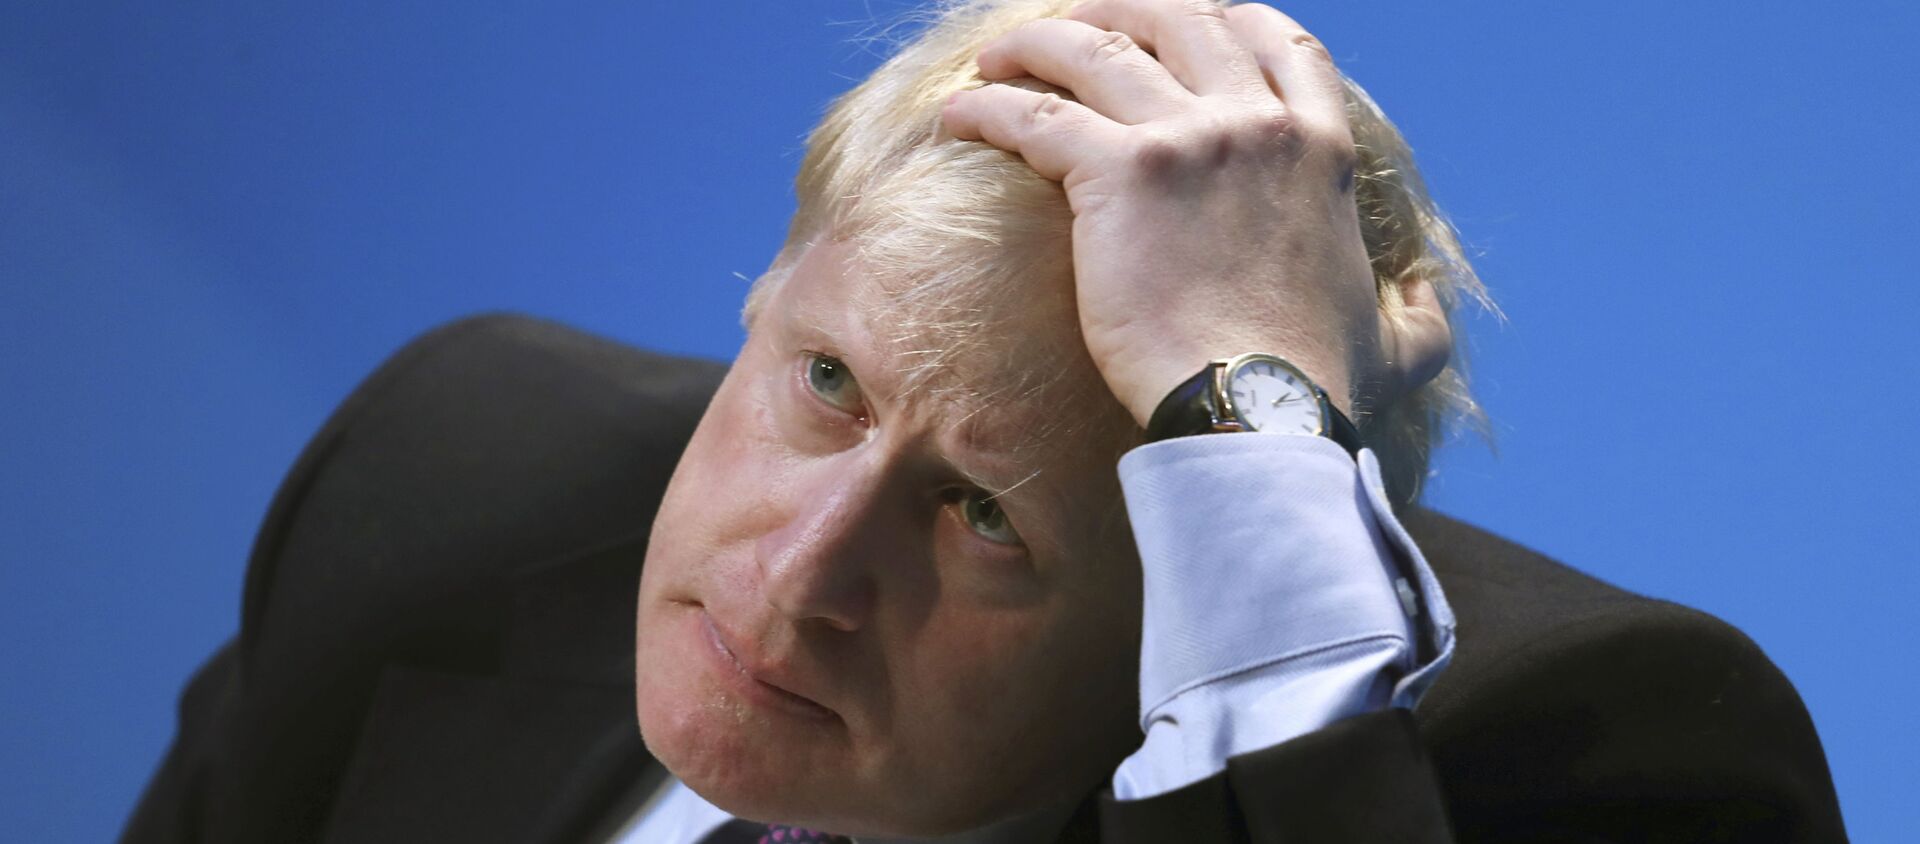 Britain's Conservative party leadership candidate Boris Johnson gestures during the first party hustings at the ICC in Birmingham, England, Saturday June 22, 2019 - Sputnik International, 1920, 28.07.2019